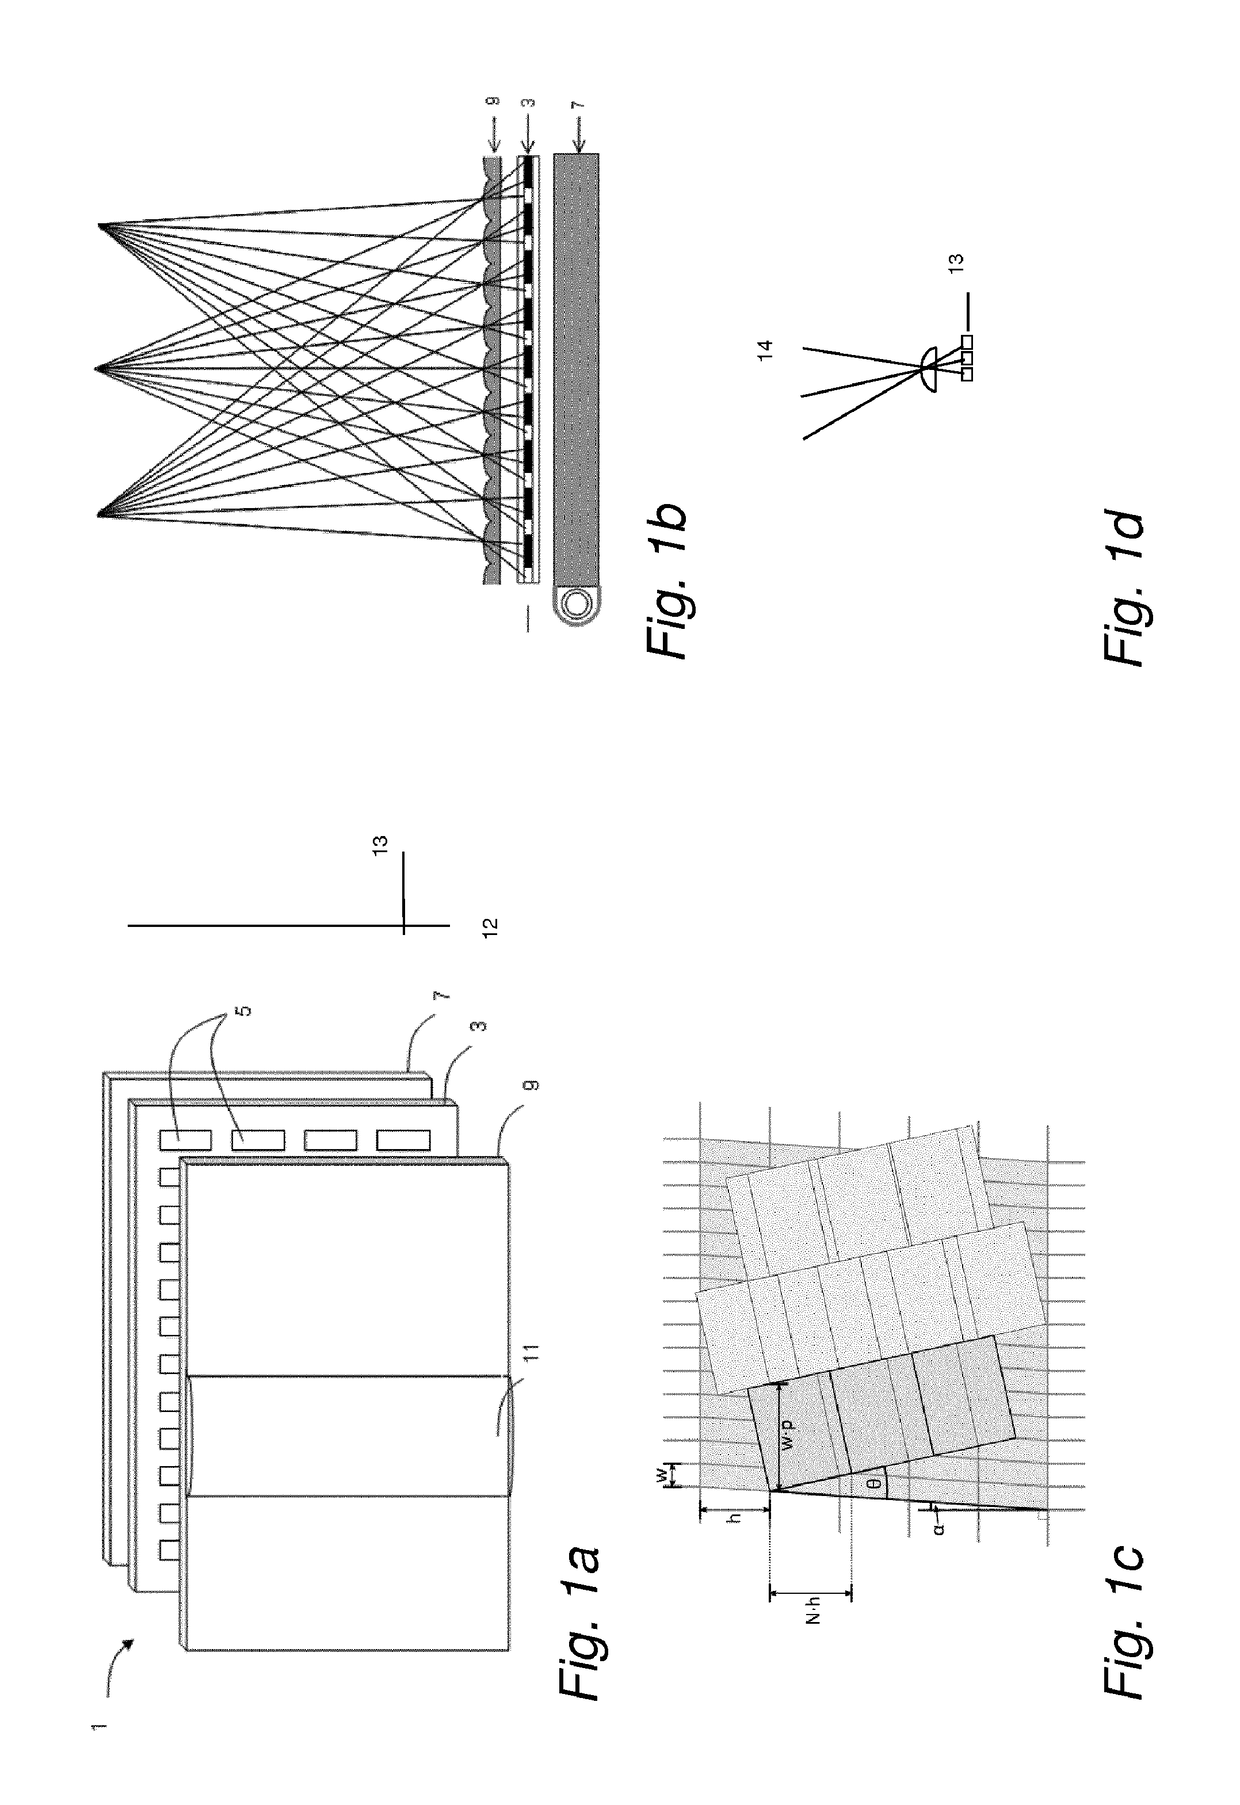 Autostereoscopic display system